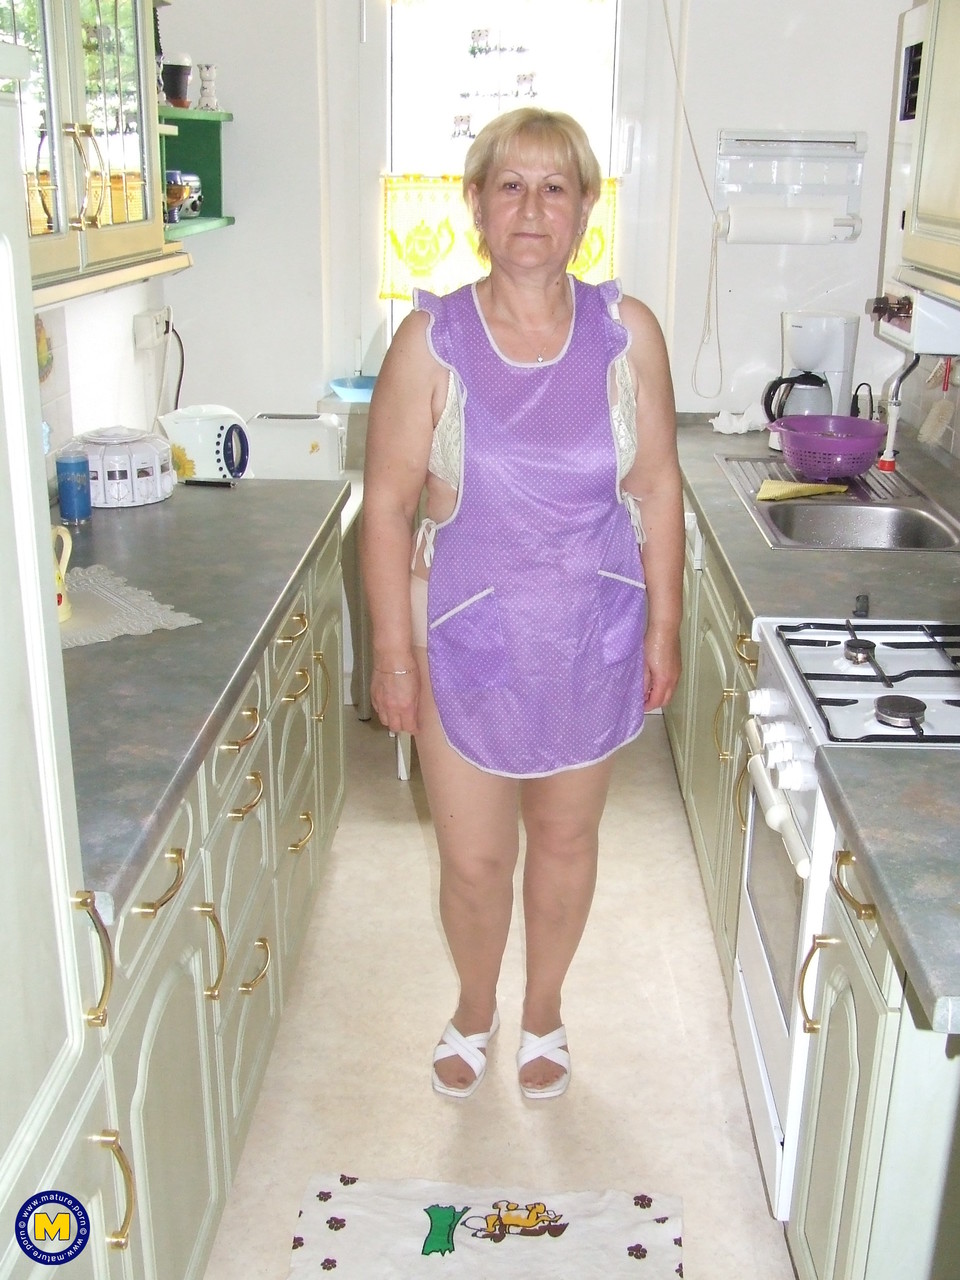 Short haired German cleaning lady Dagmar shows her mature cunt in the kitchen foto porno #425226956 | Mature NL Pics, Dagmar, German, porno ponsel